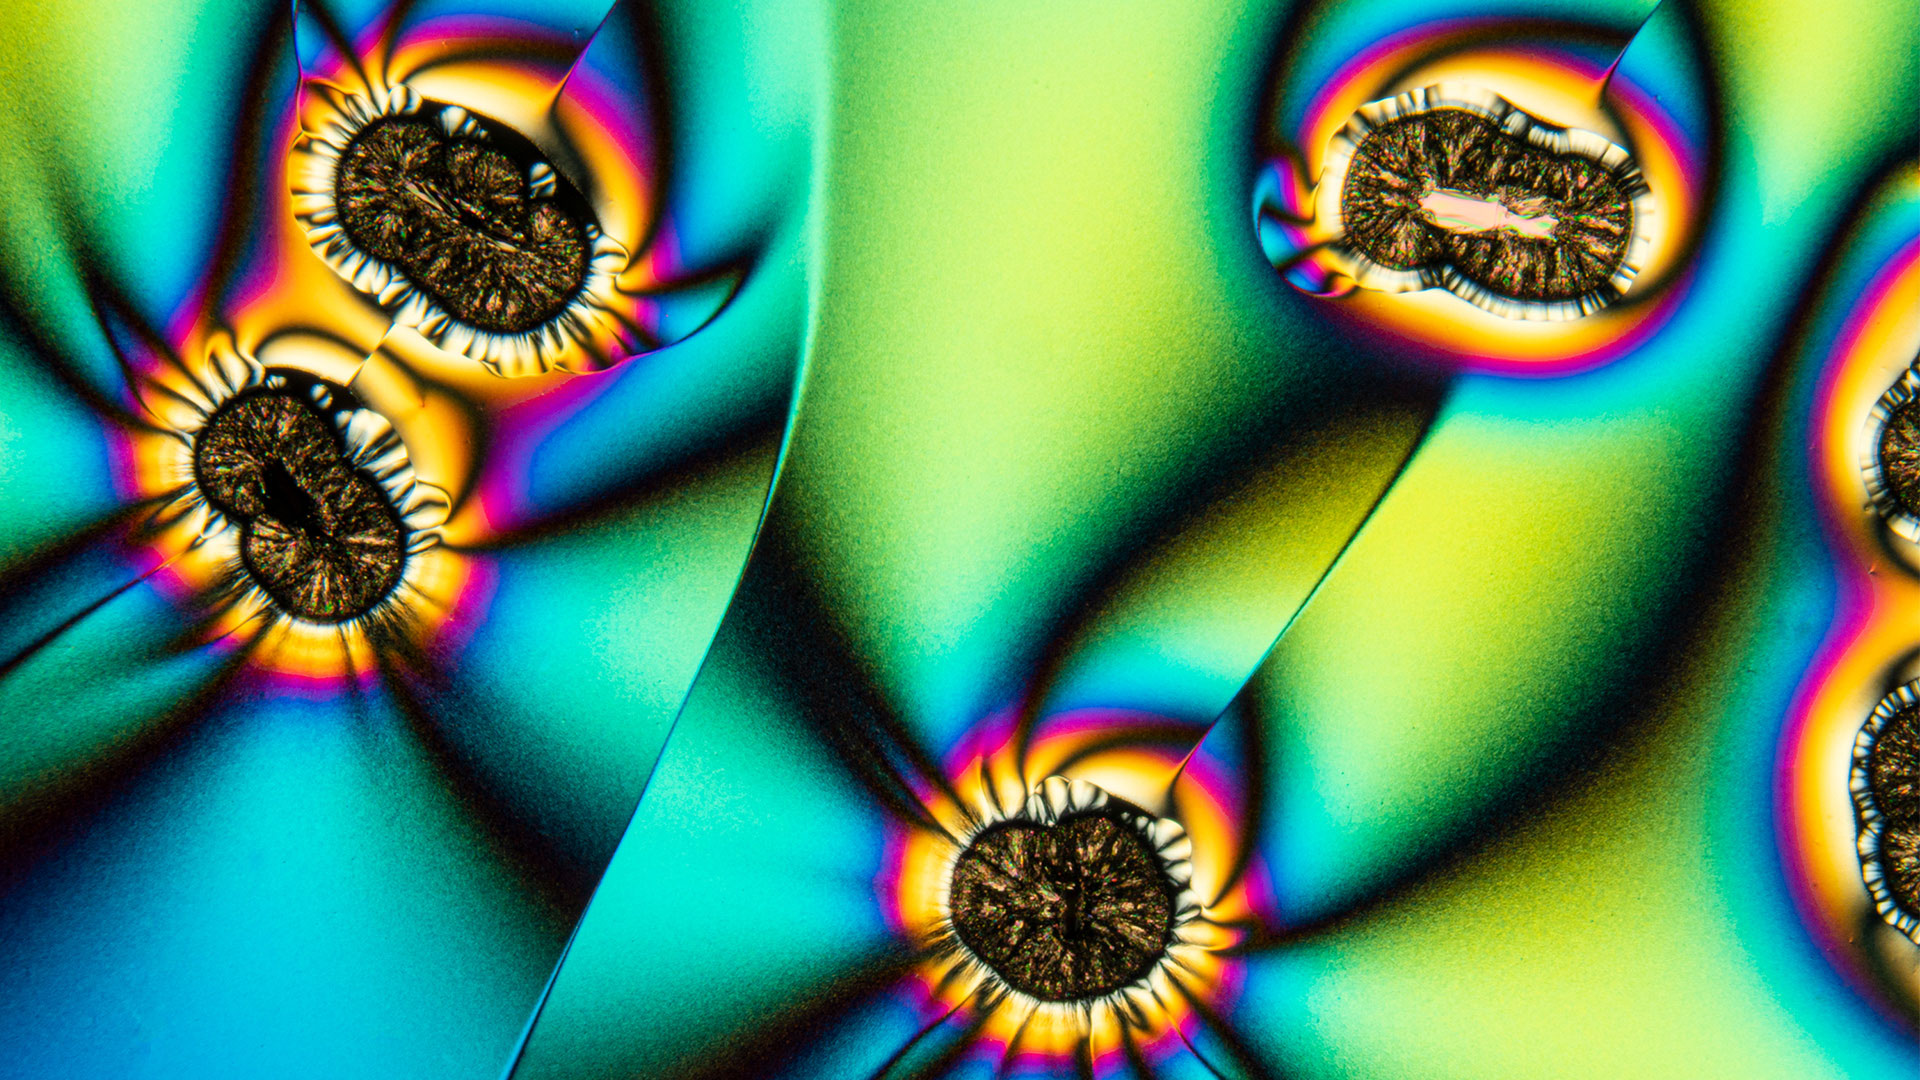 Winning image in the category of Education: "Vitamin C crystals", acquired with ZEISS Axio Scope.A1. Courtesy: R. Berdan, Science & Art Multimedia, Calgary, Canada